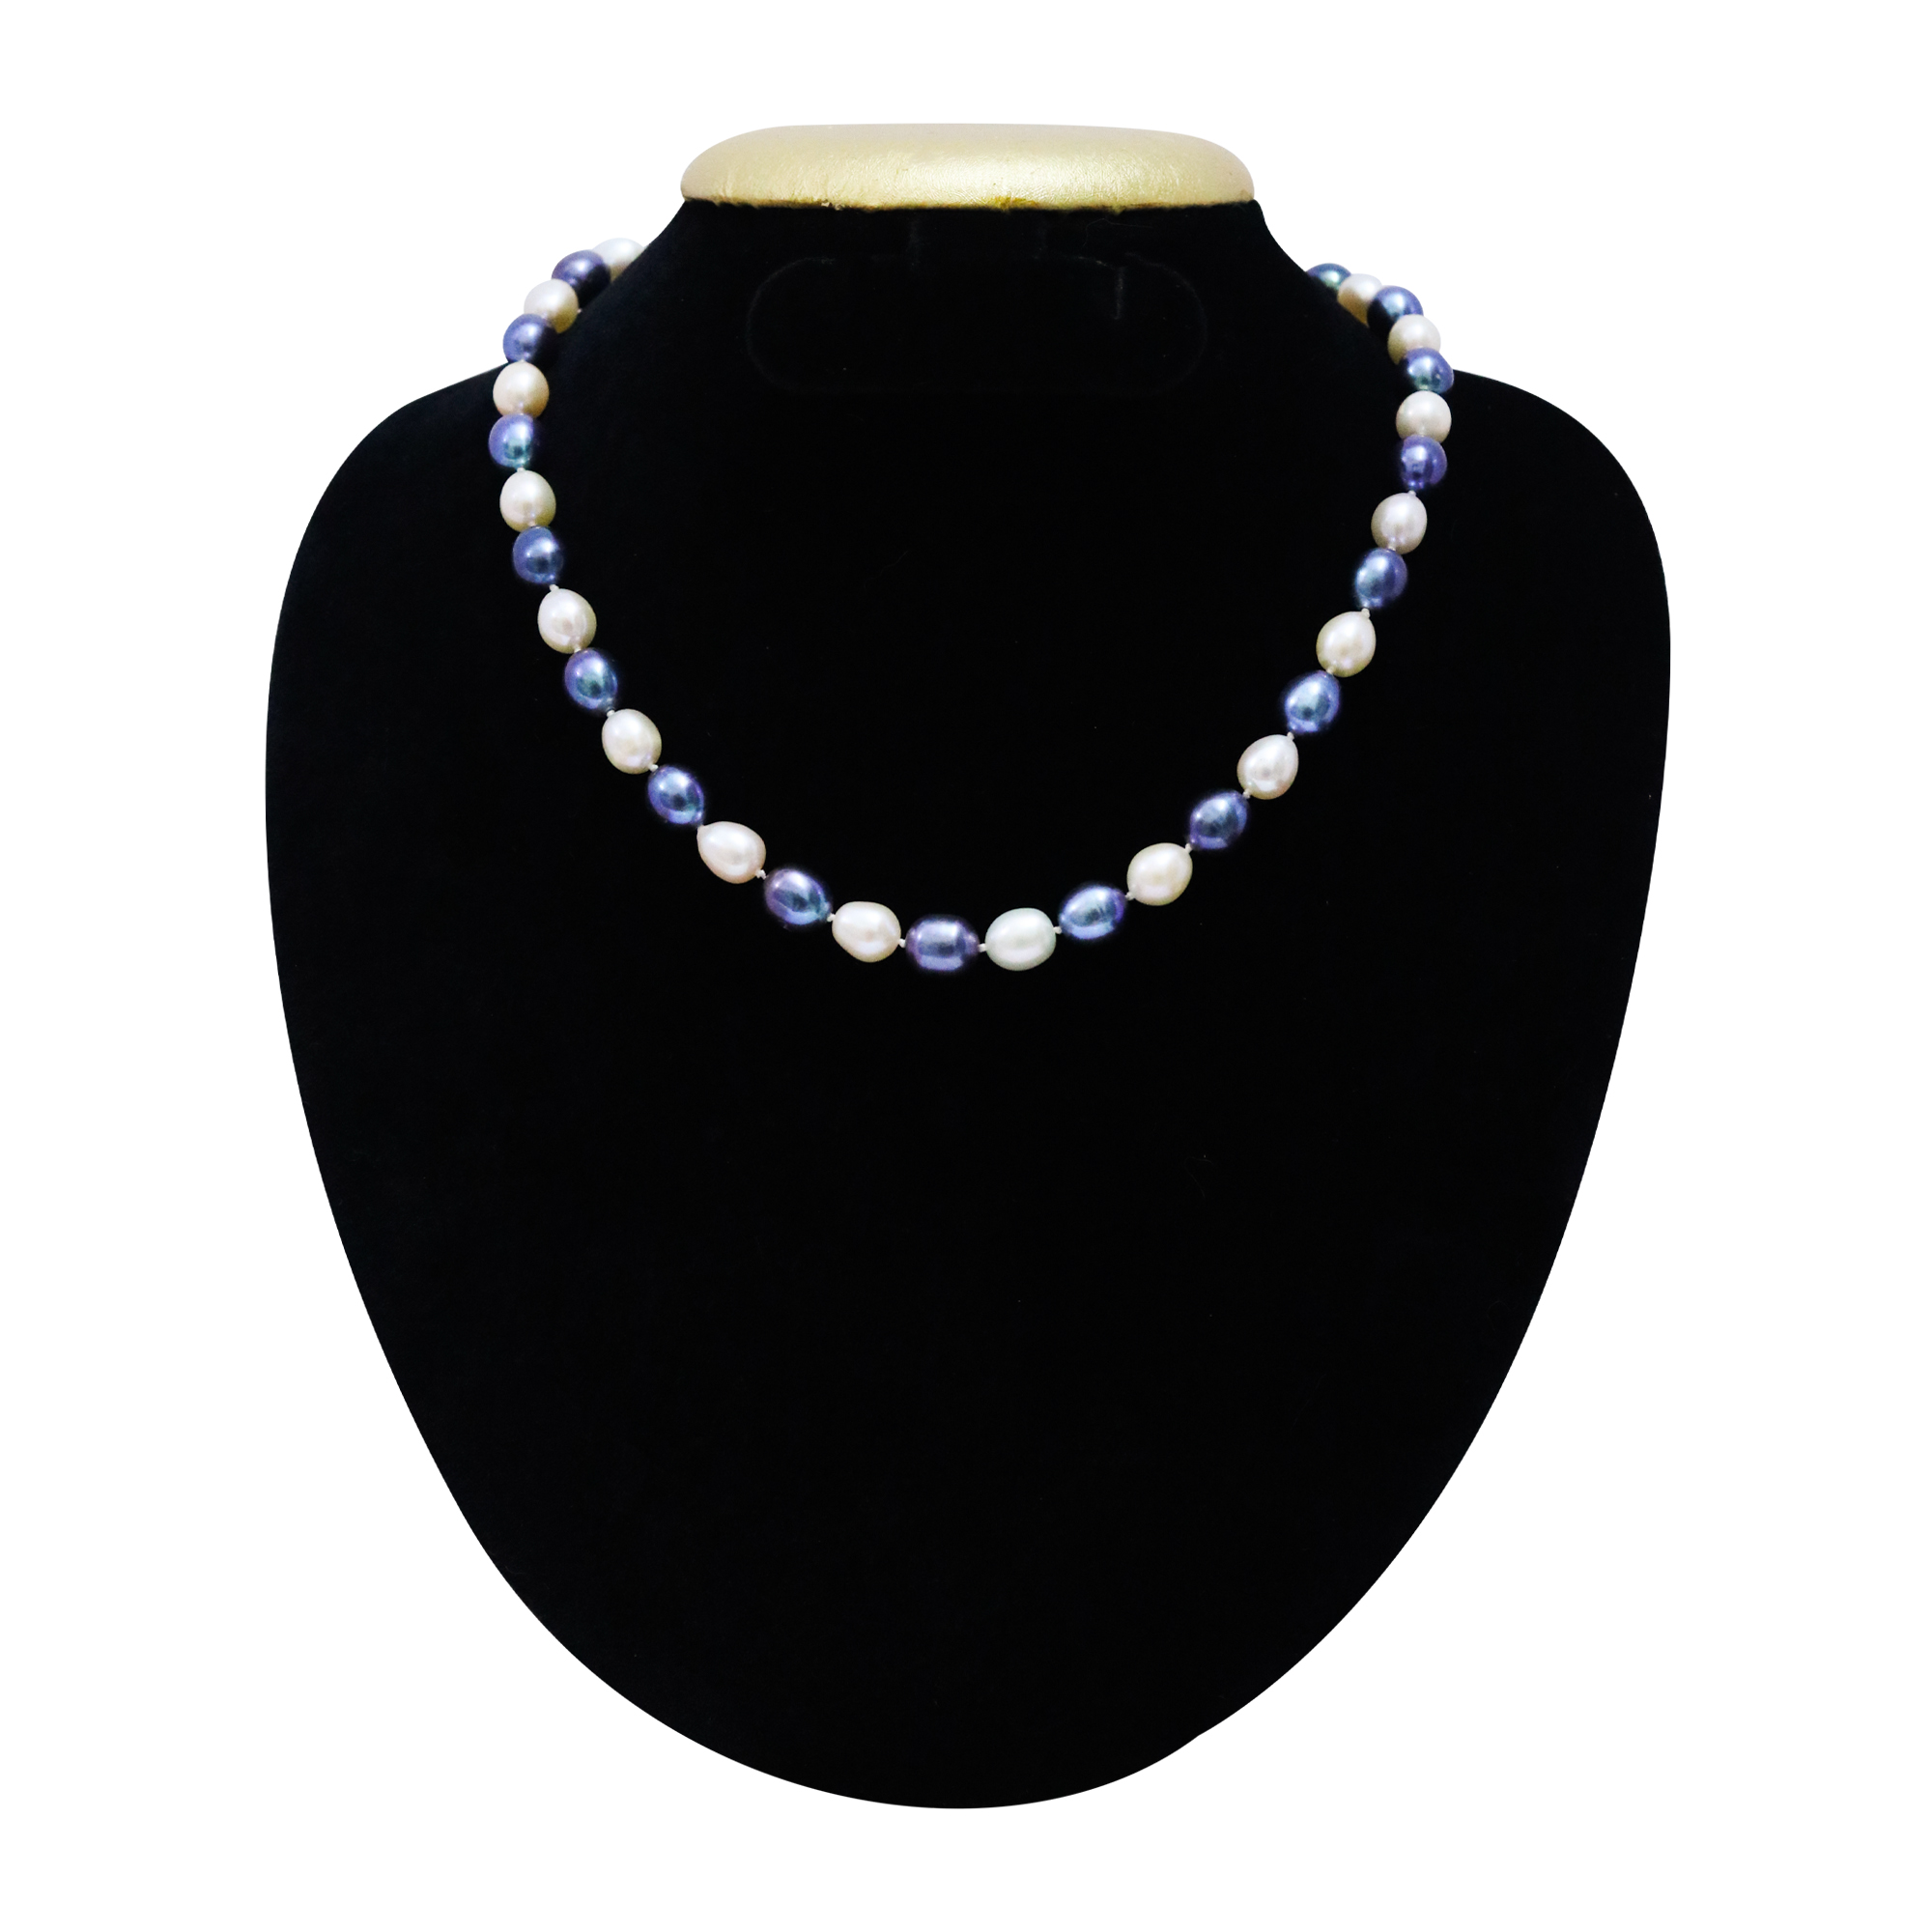 Blue and White Beaded Necklace - South Indian Temple Jewellery | Arjunazz